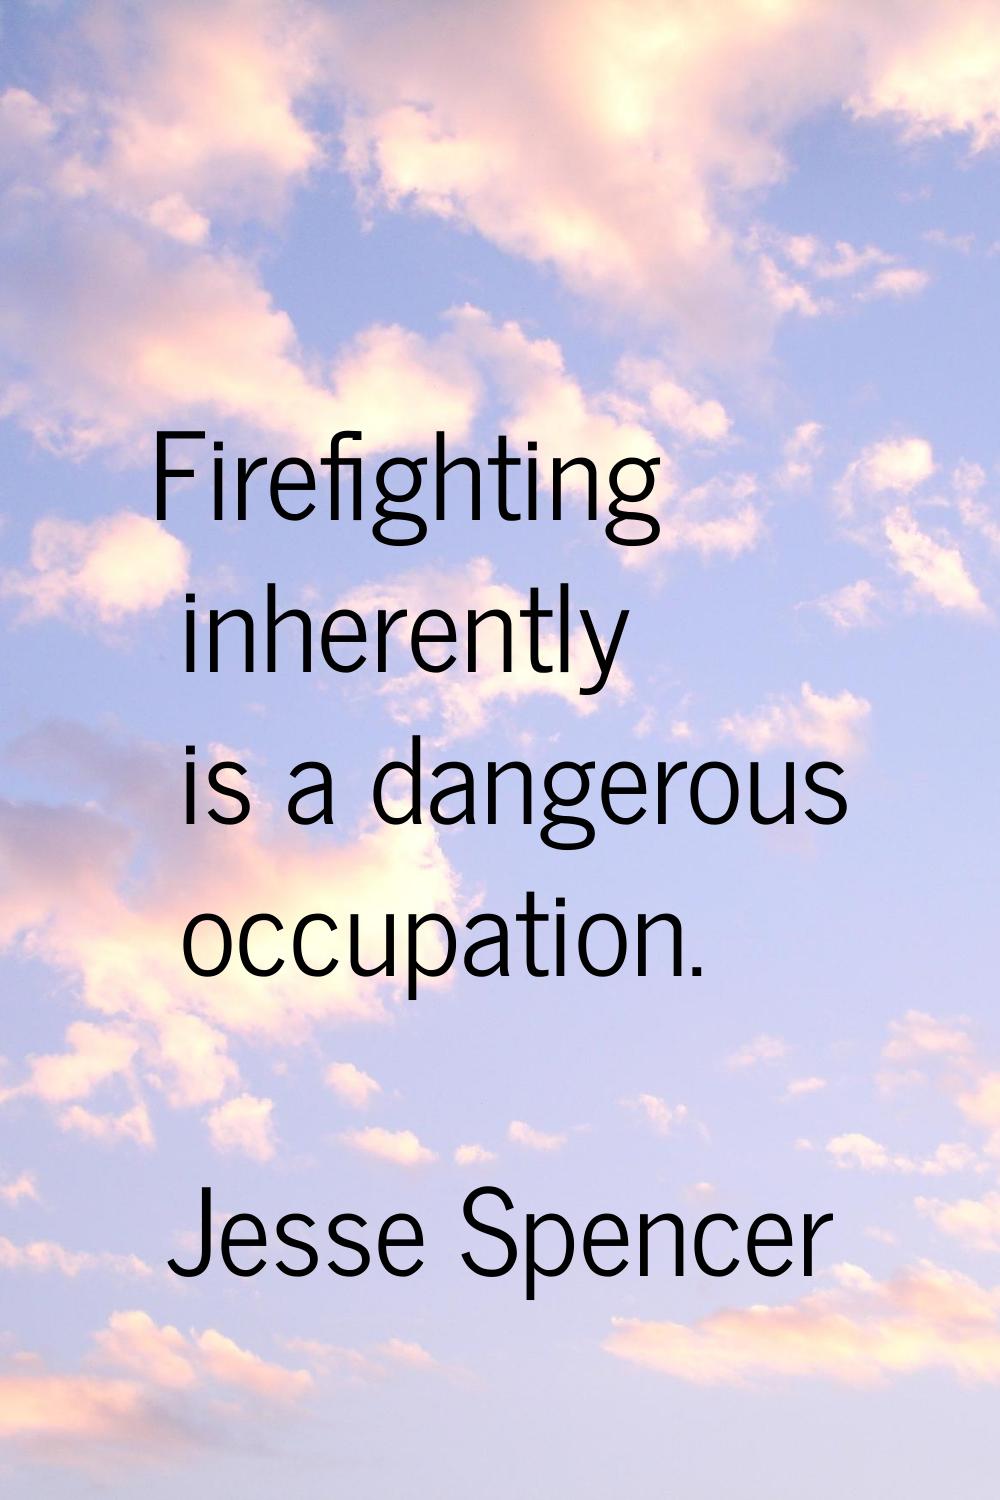 Firefighting inherently is a dangerous occupation.